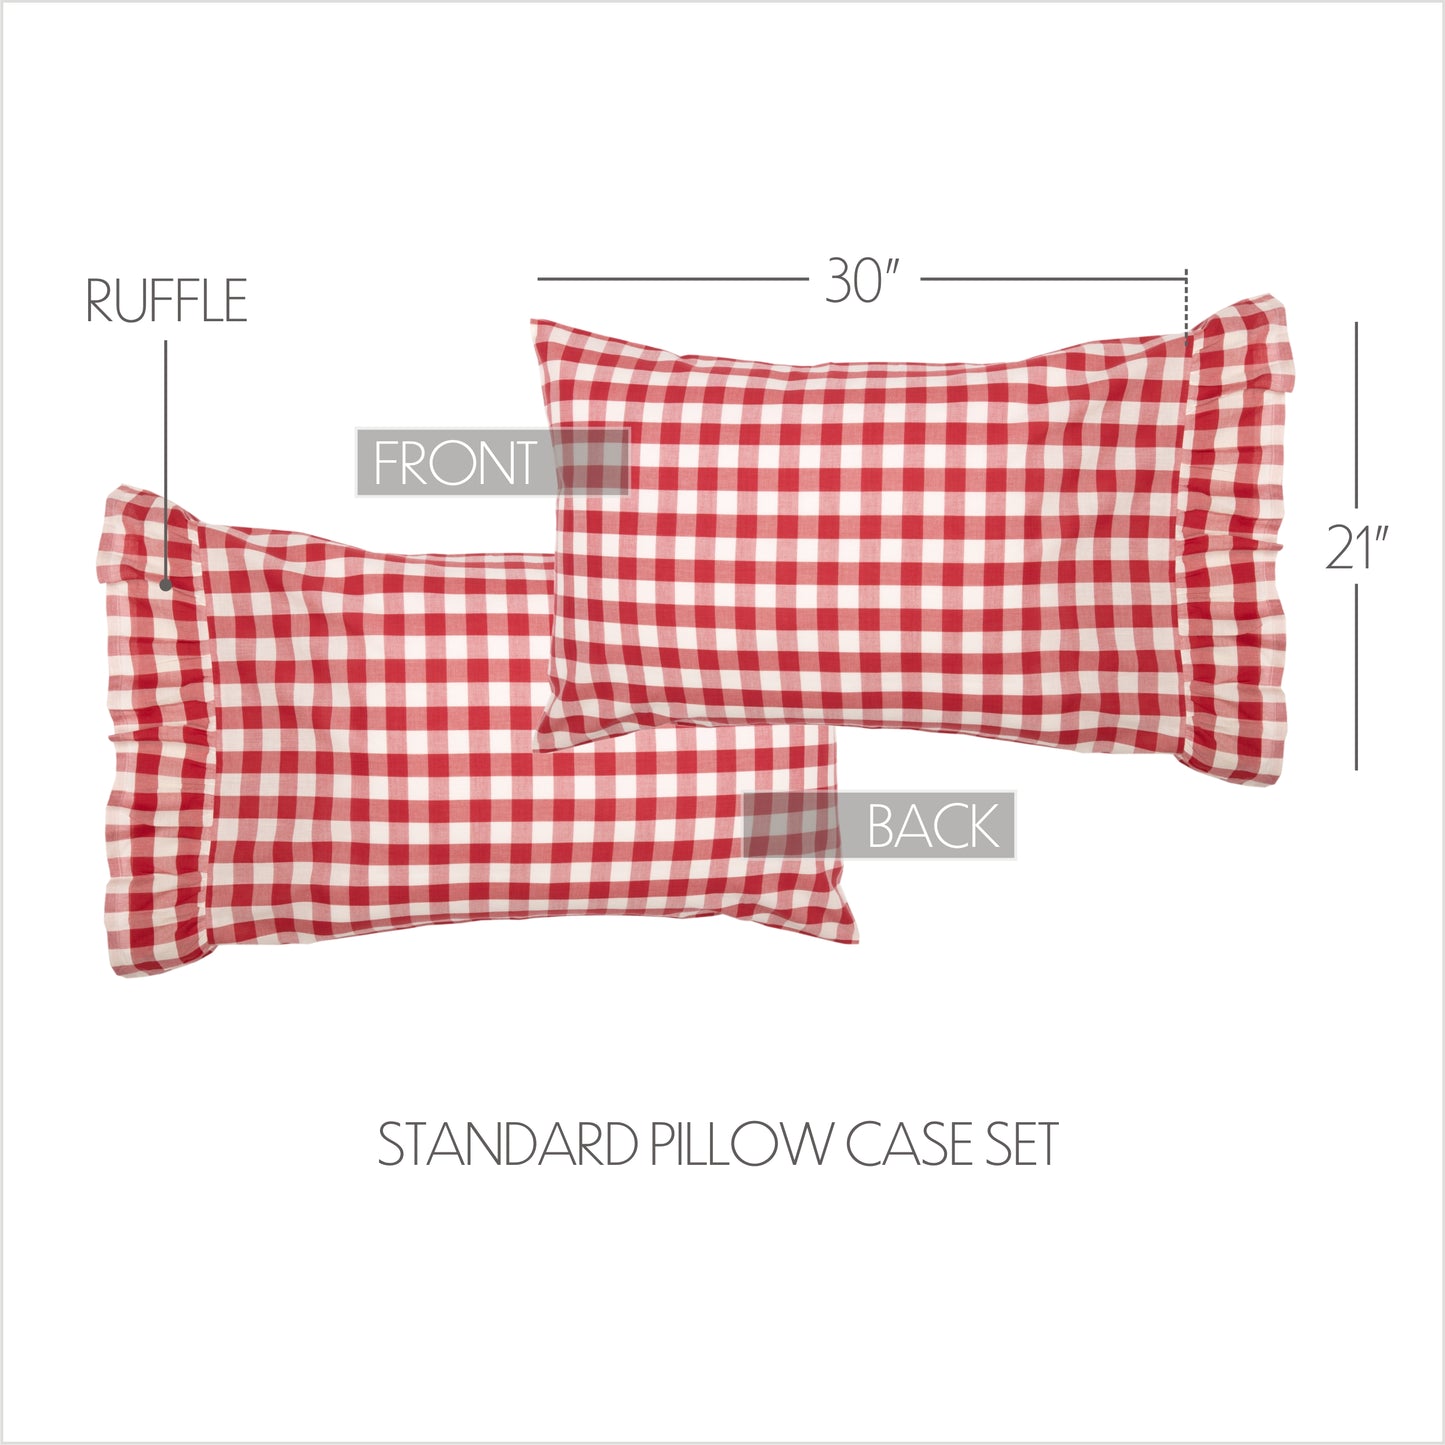 51765-Annie-Buffalo-Red-Check-Standard-Pillow-Case-Set-of-2-21x30-4-image-1